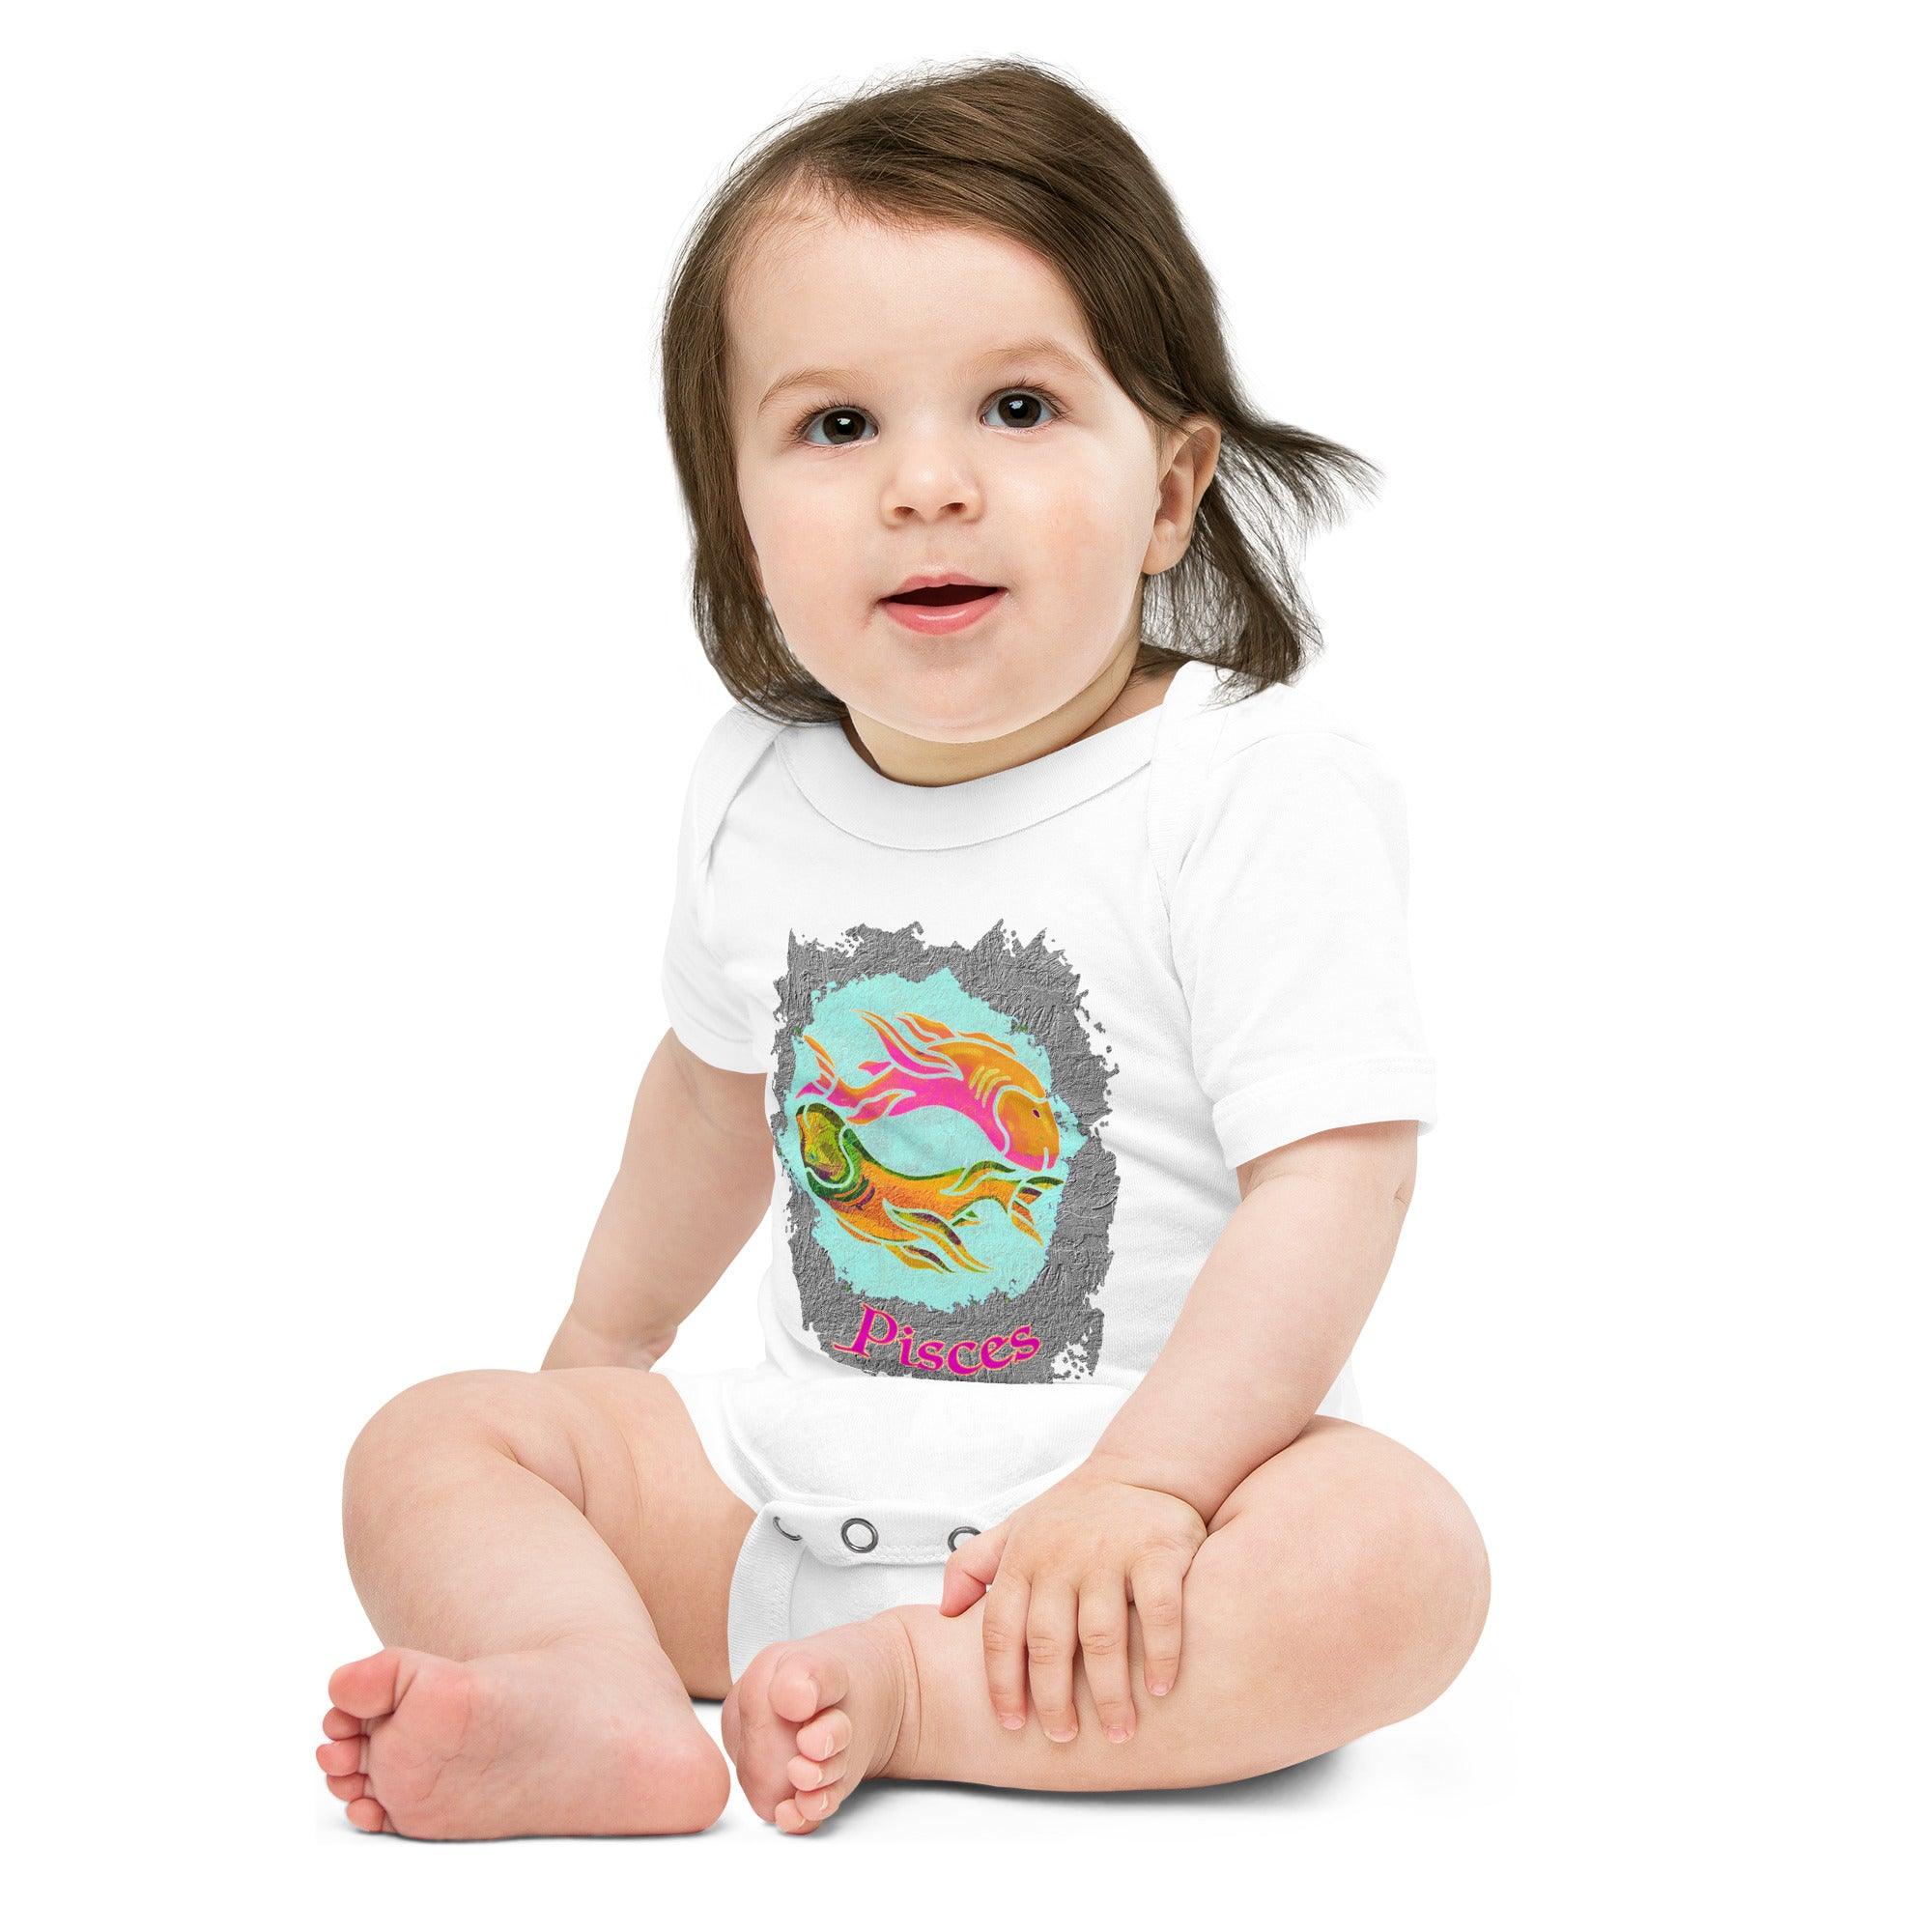 Cute astrological Pisces design on baby one-piece outfit.